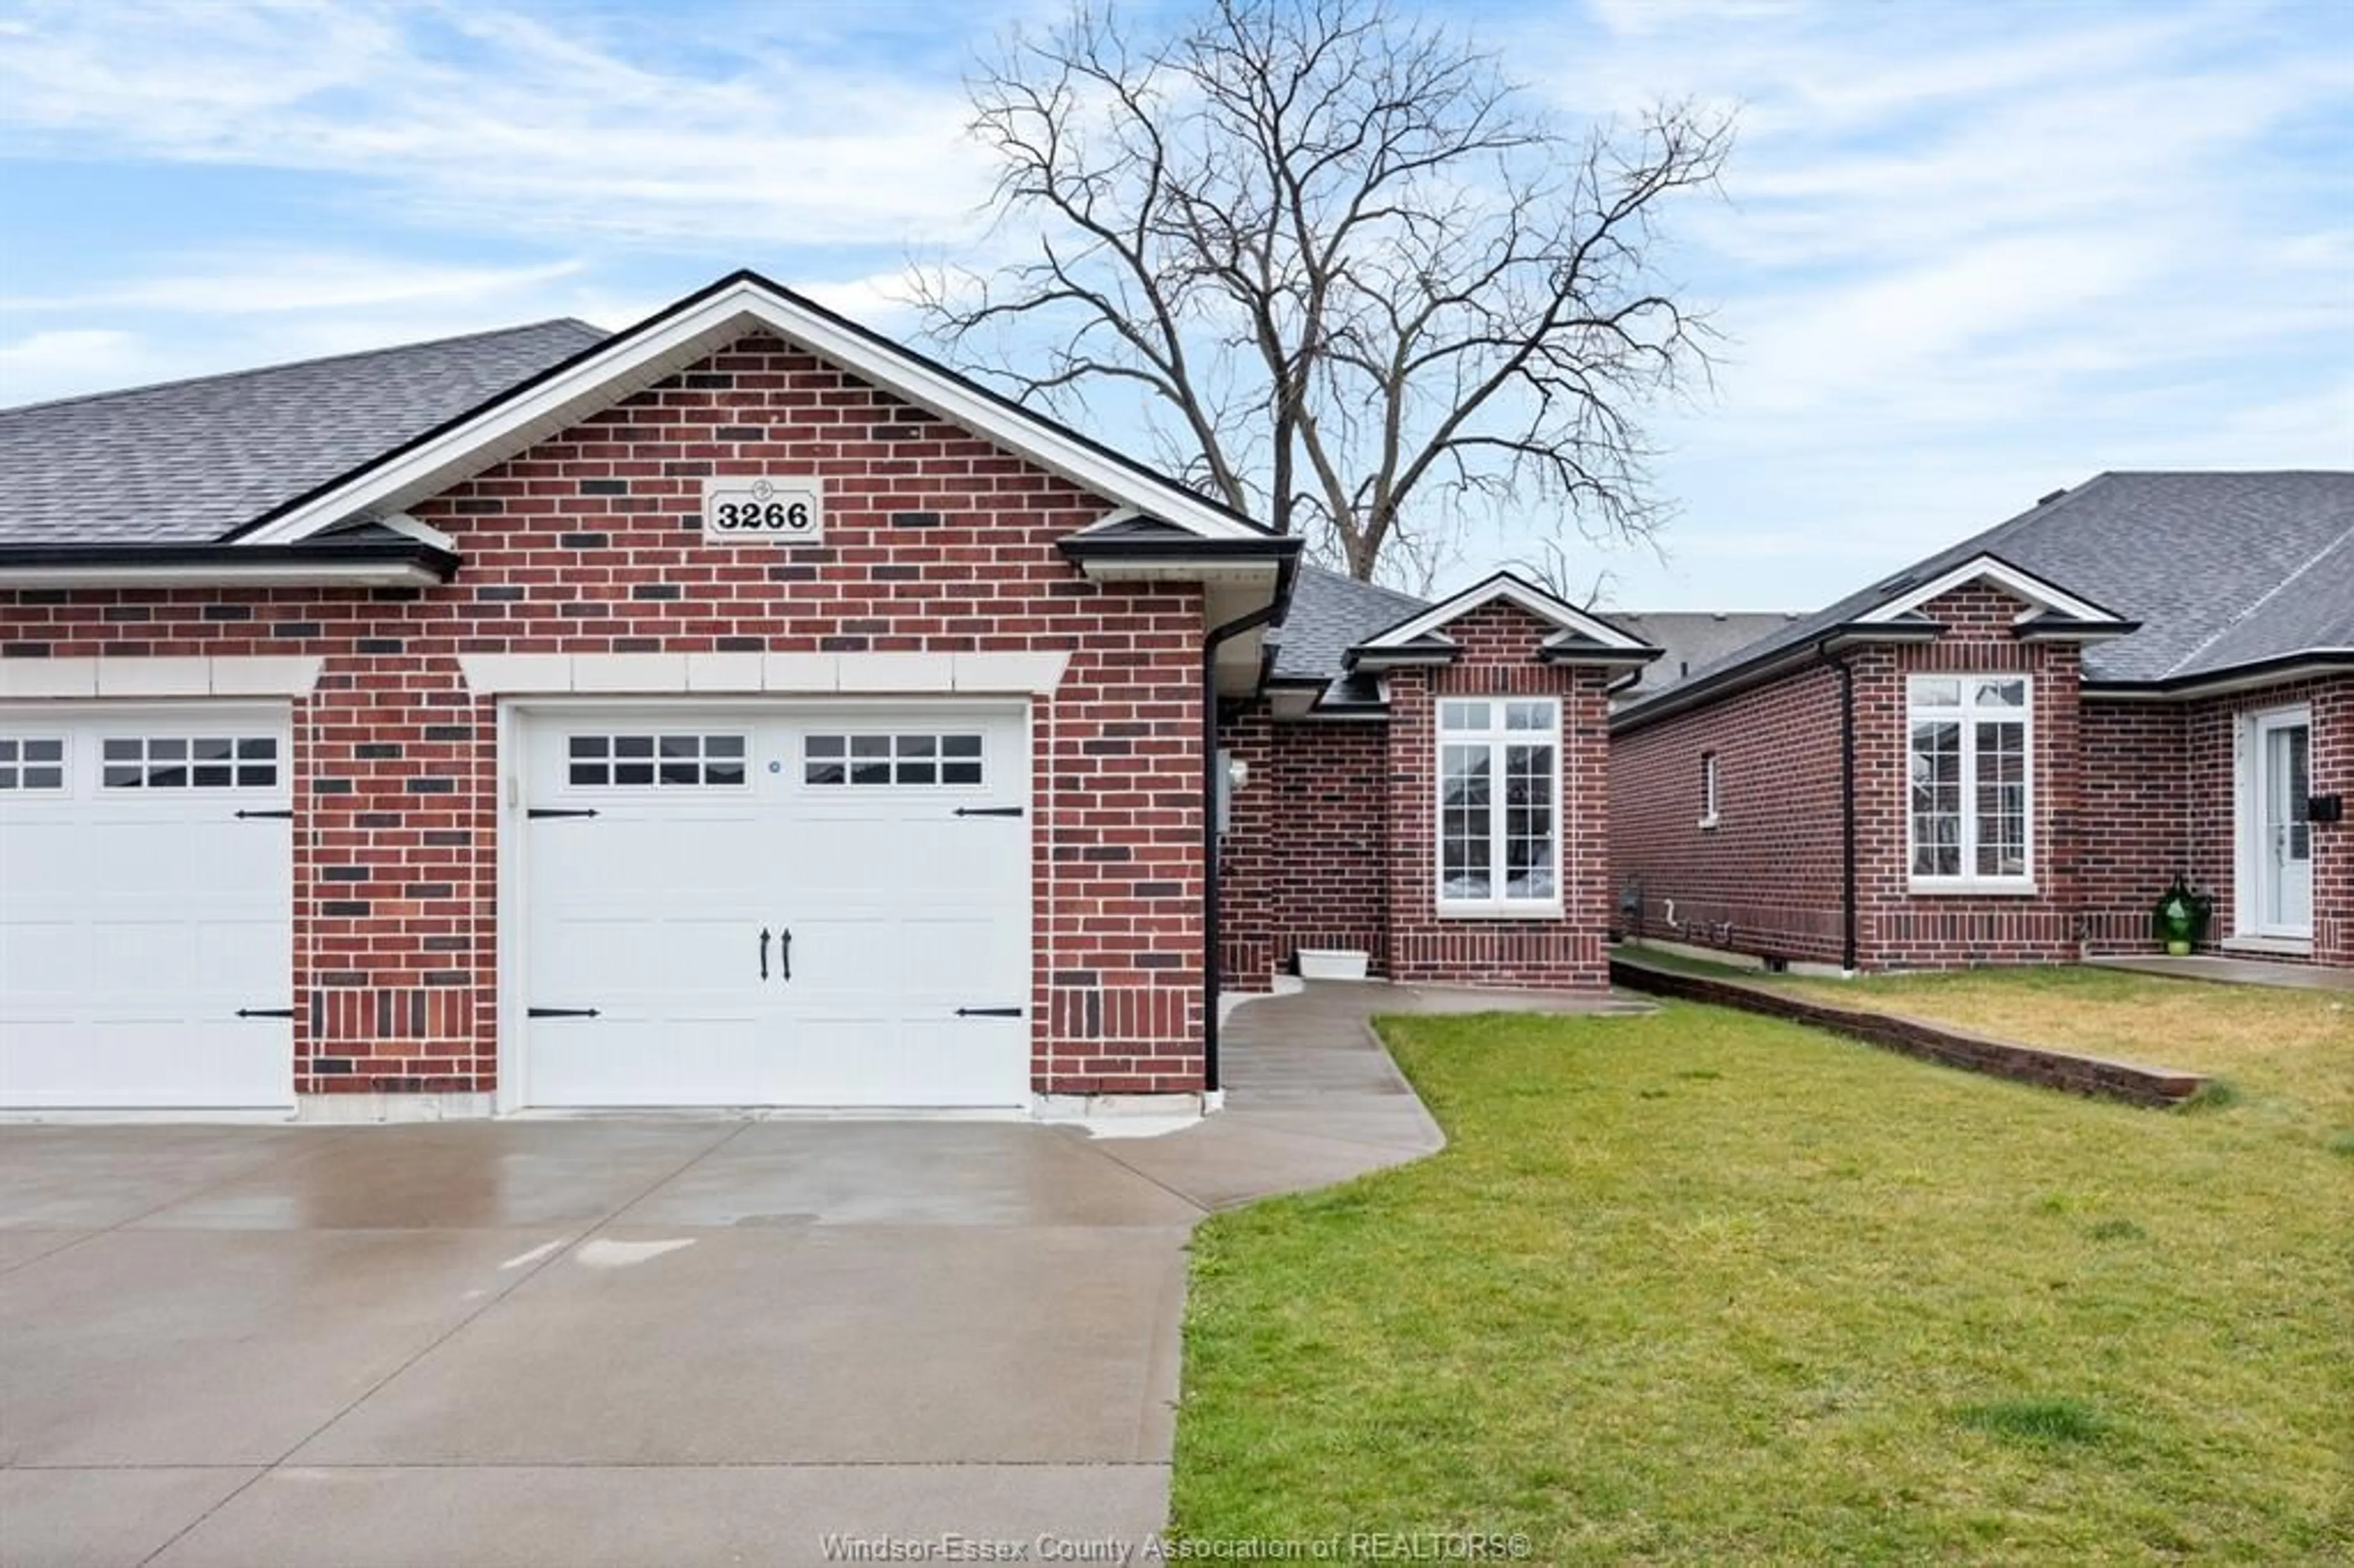 Home with brick exterior material for 3266 ARPINO Ave, Windsor Ontario N8N 0A5